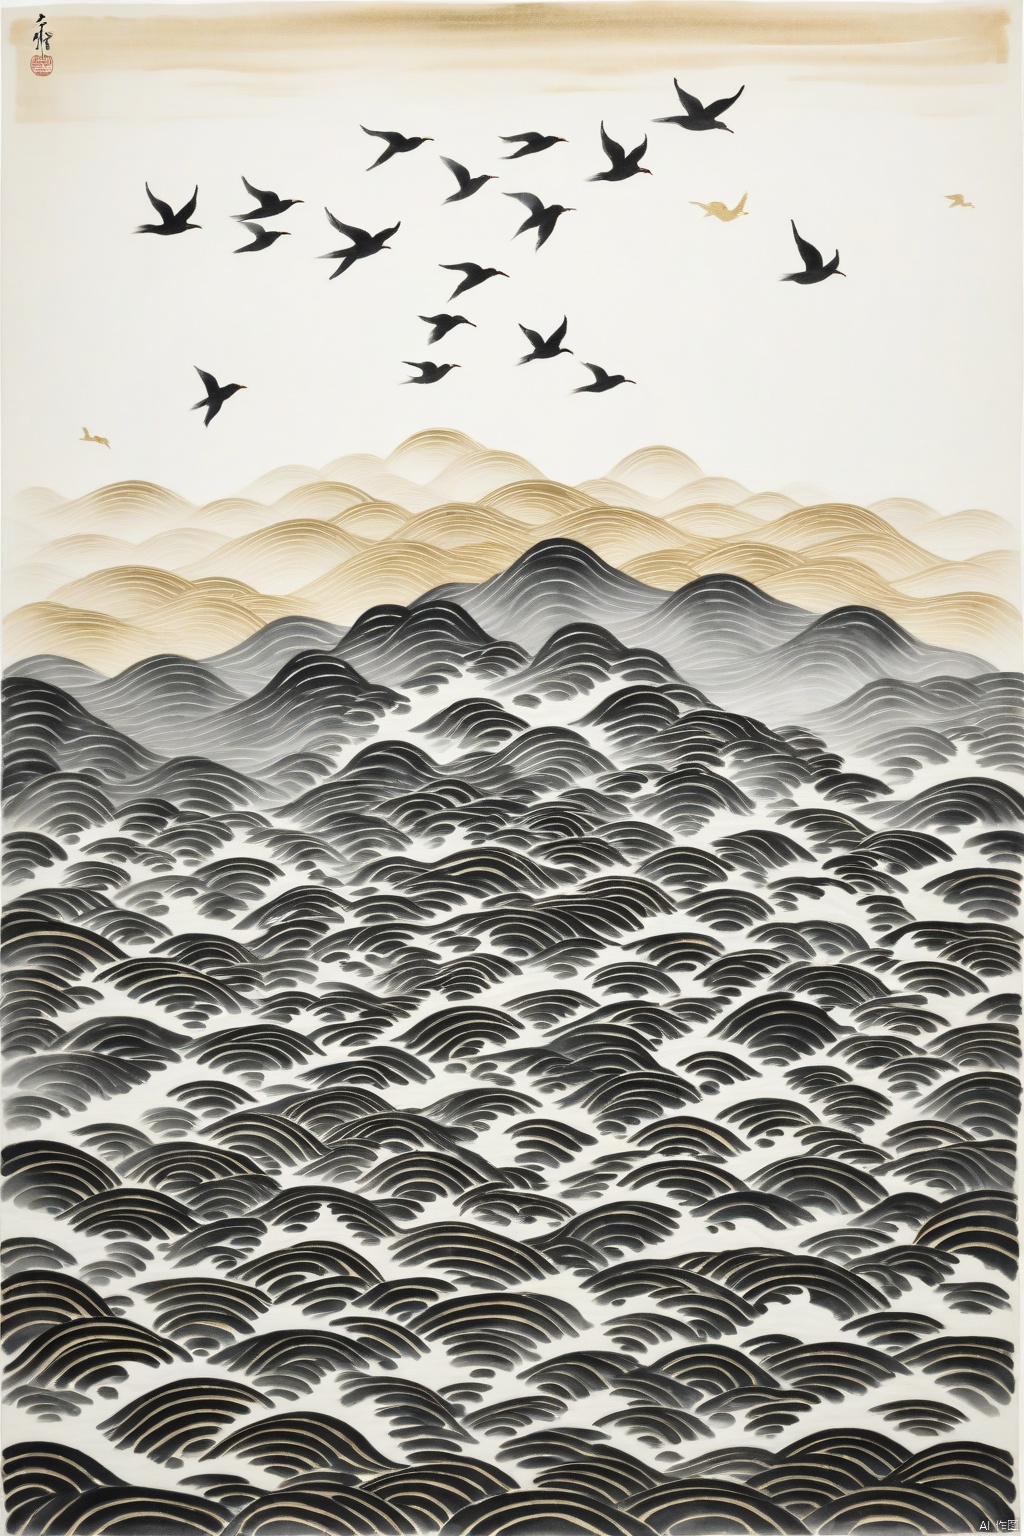  chinese ink painting,The image is an artistic representation with wavy,undulating patterns in a combination of black and gold. The patterns give an optical illusion of depth and movement. In the bottom right corner,there is a small boat floating on water. Above the boat,a flock of white birds is seen flying in a V-formation. The overall color palette consists of black,gold,and white.,,,